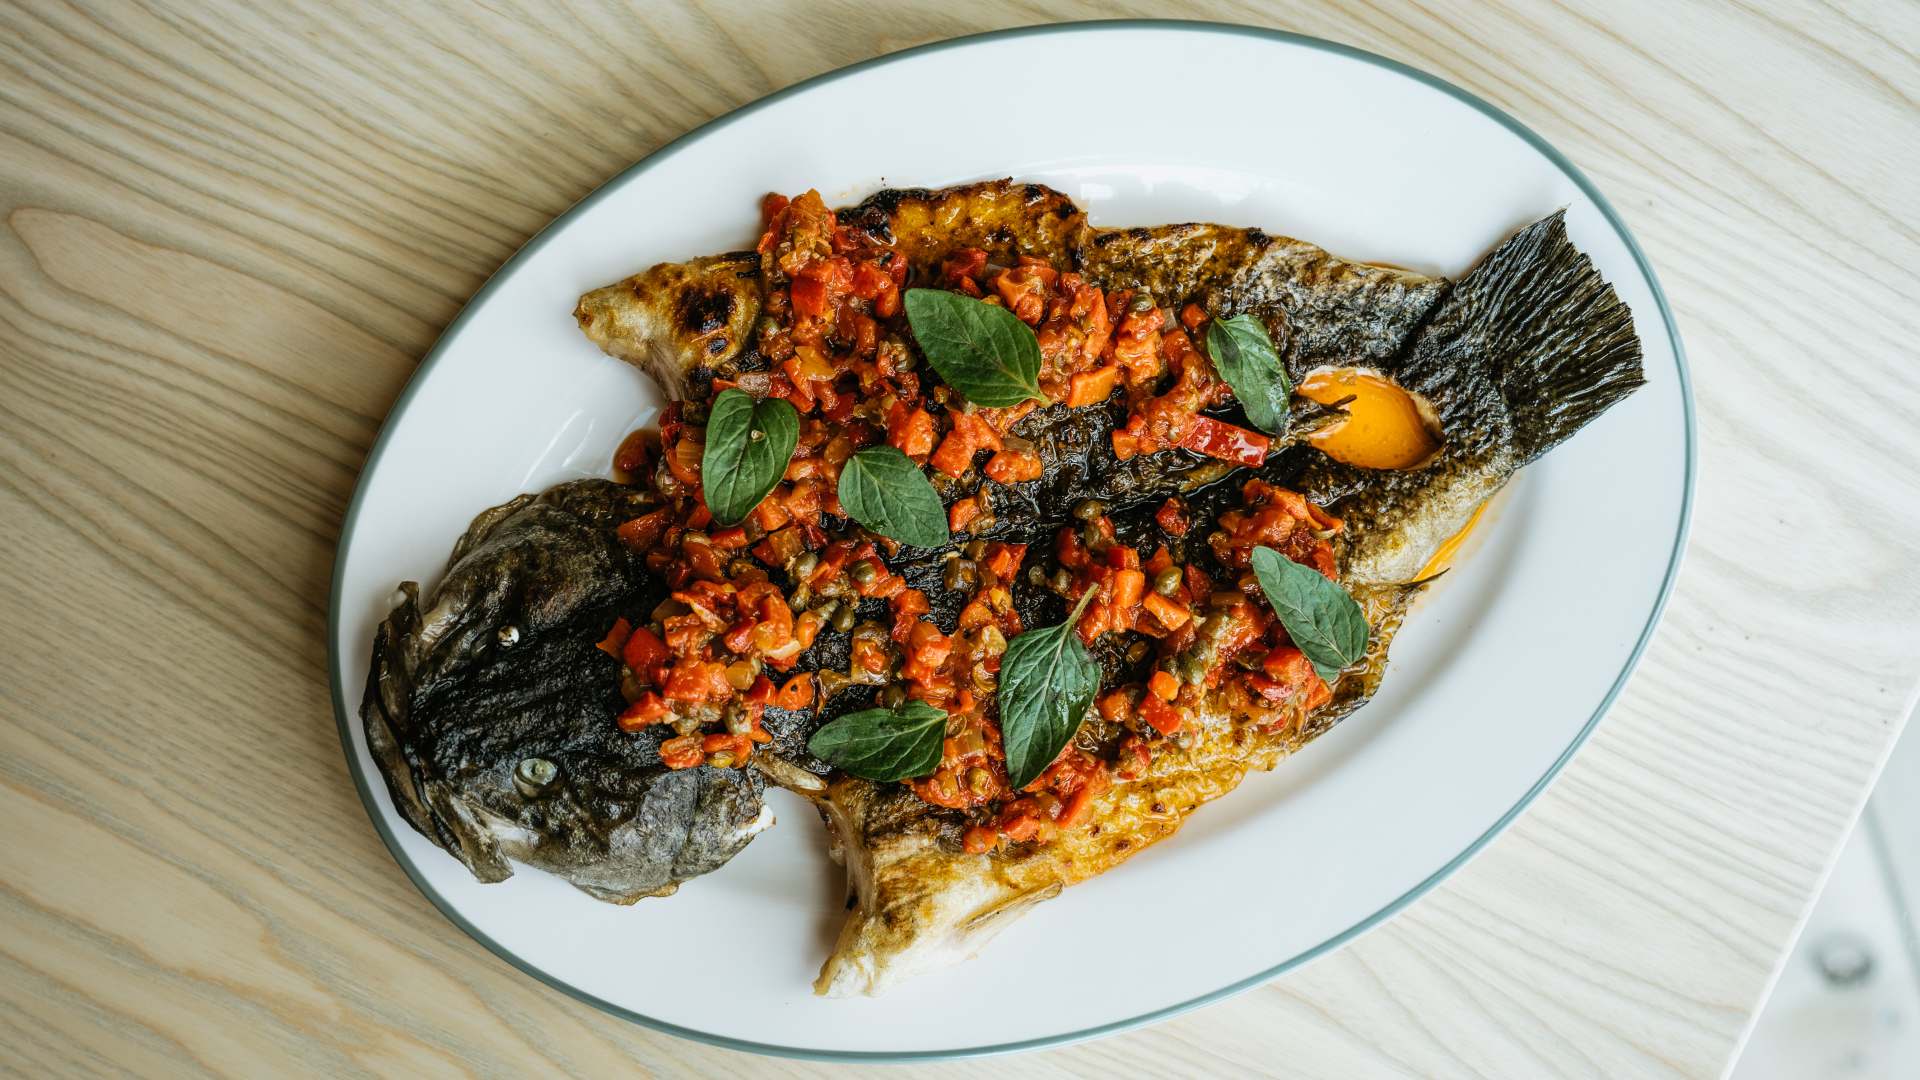 a whole baked fish on a plate from Stokehouse Pasta & Bar